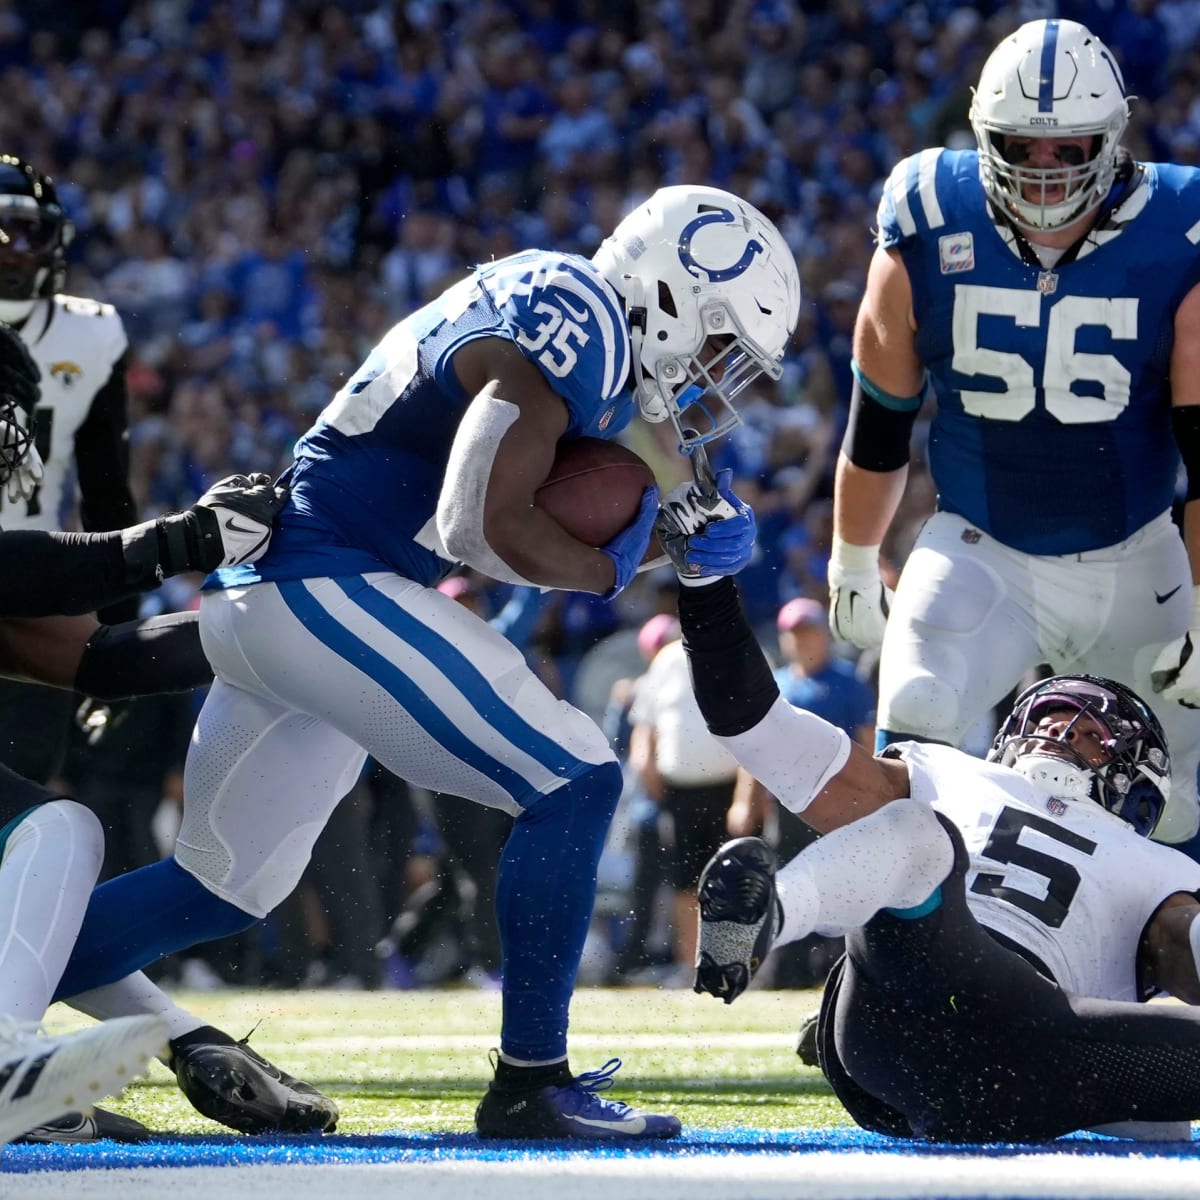 How to Stream the Jaguars vs. Colts Game Live - Week 1